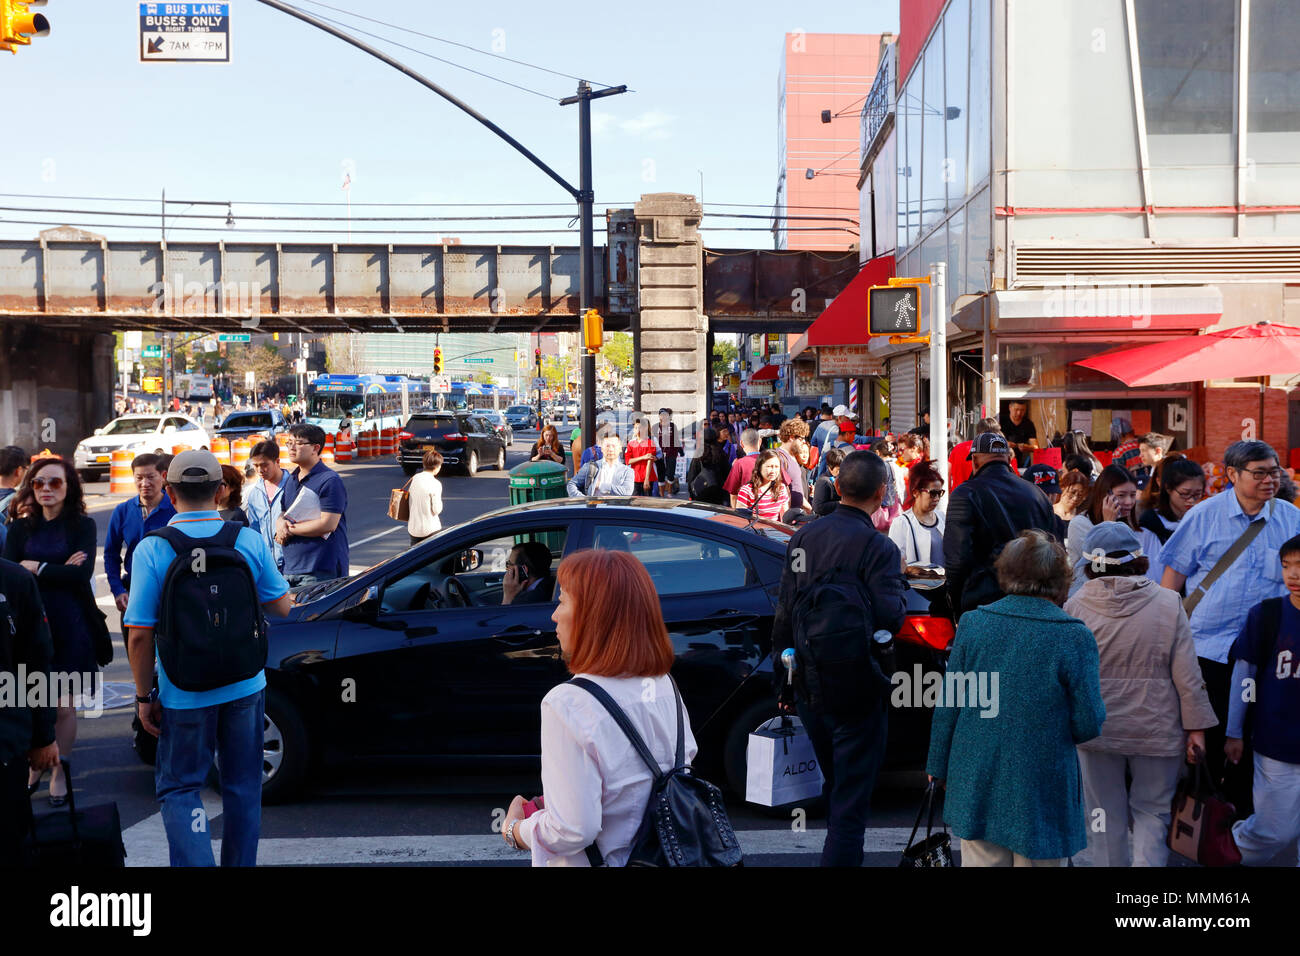 A driver sits at a crosswalk on a cellphone call while pedestrians walk around the vehicle in Downtown Flushing, New York, NY. 法拉盛, 法拉盛華埠, 華裔美國人, 紐約 Stock Photo